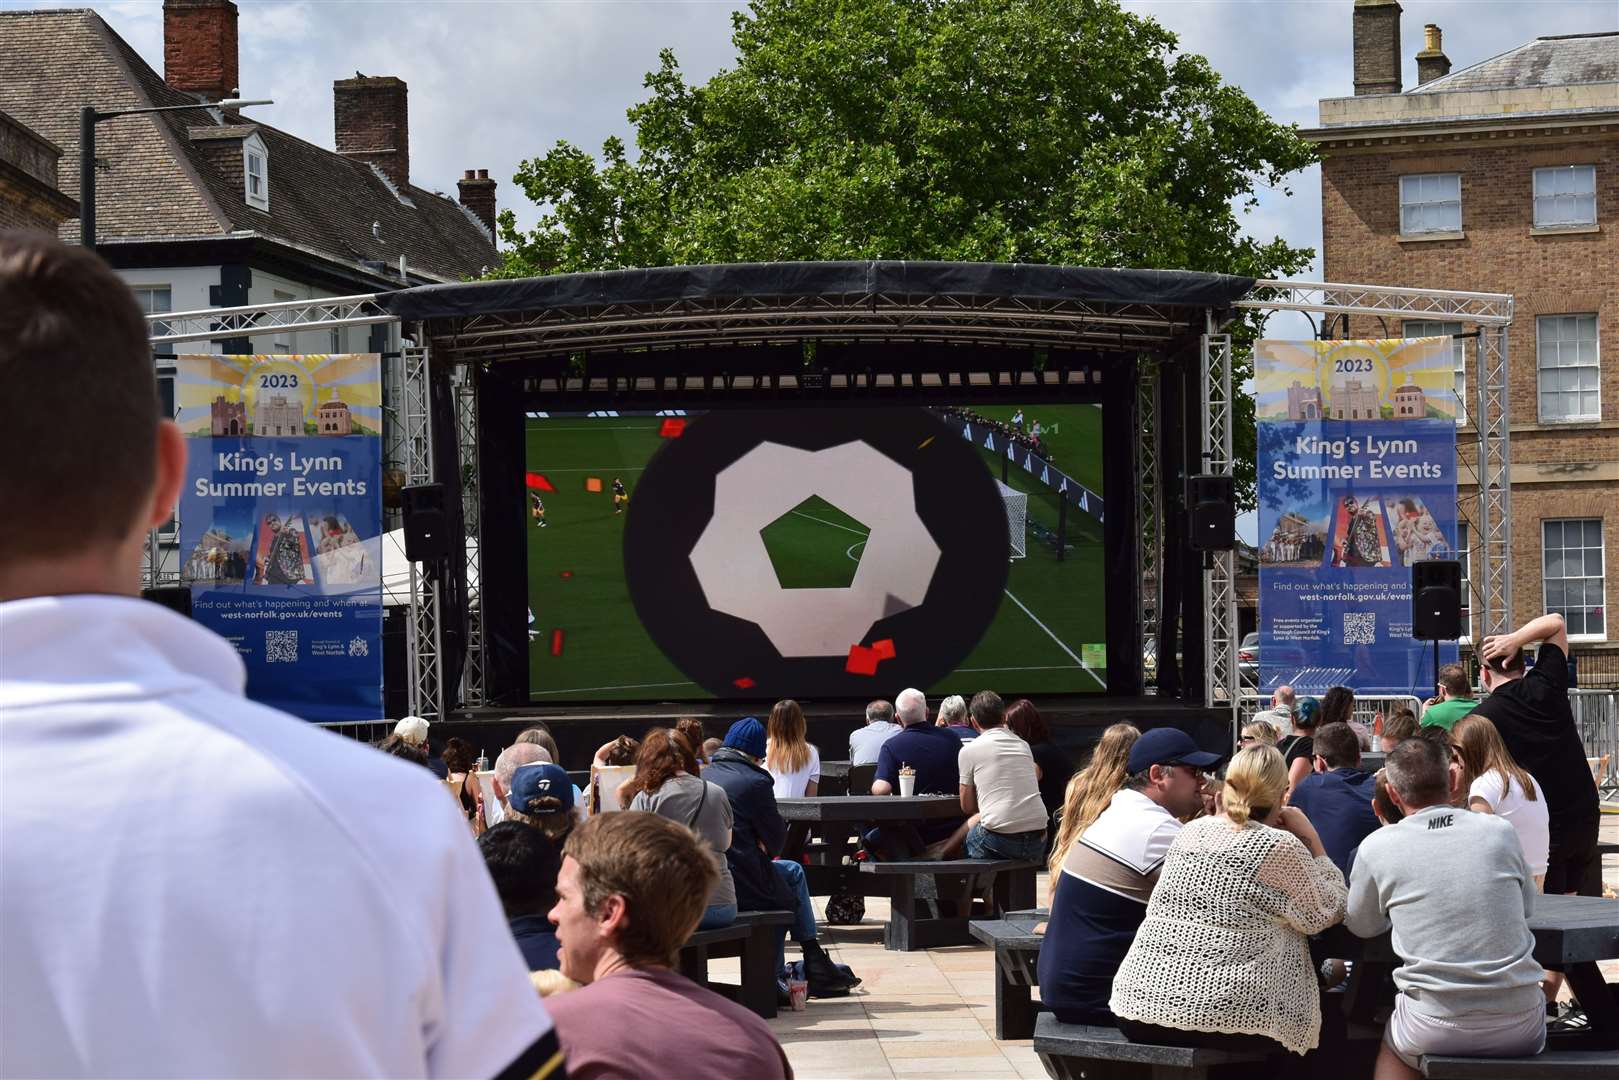 The FIFA Women's World Cup Final will be shown on the giant screen in King's Lynn on Sunday. Picture: West Norfolk Council